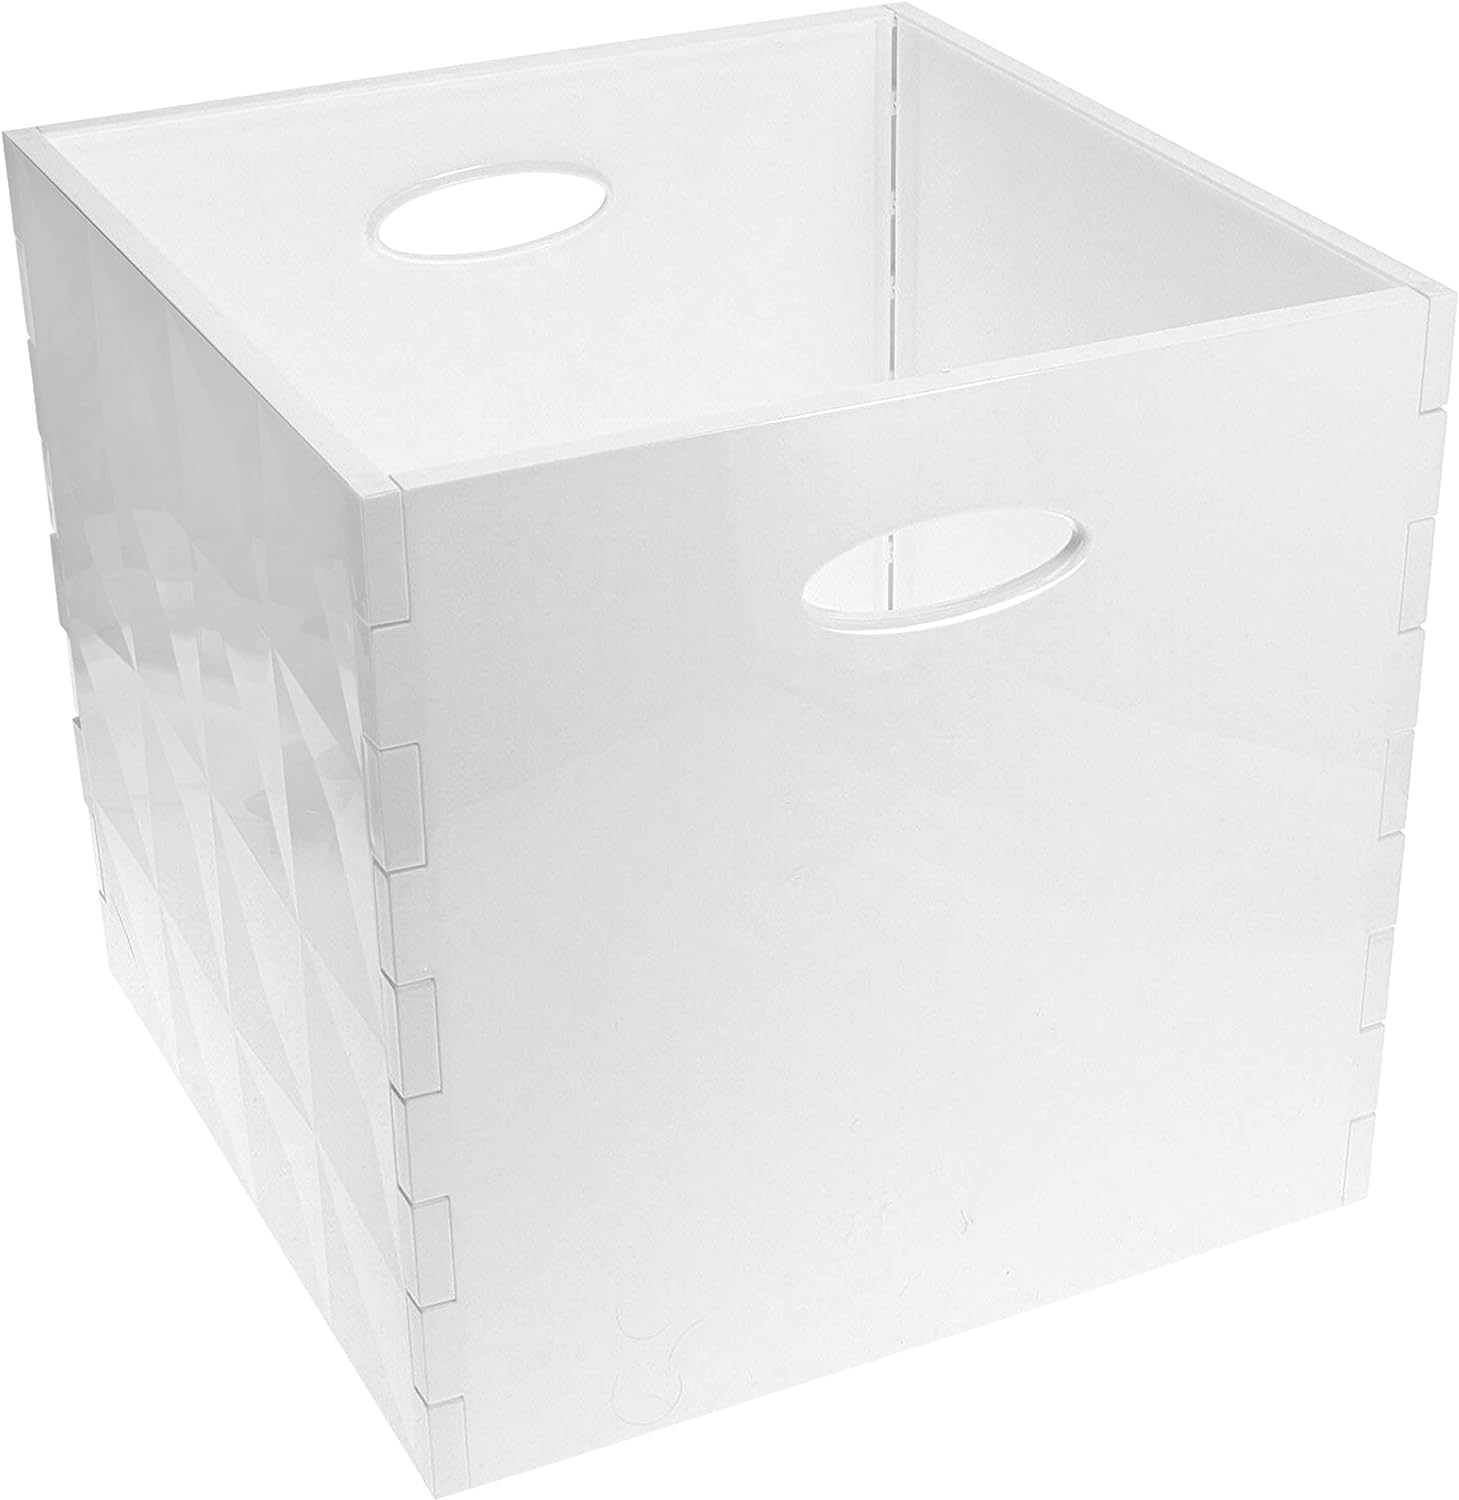 Home+Solutions Plastic and Bamboo White Large Crystal Bin - Multipurpose Storage Container (81534) Large White